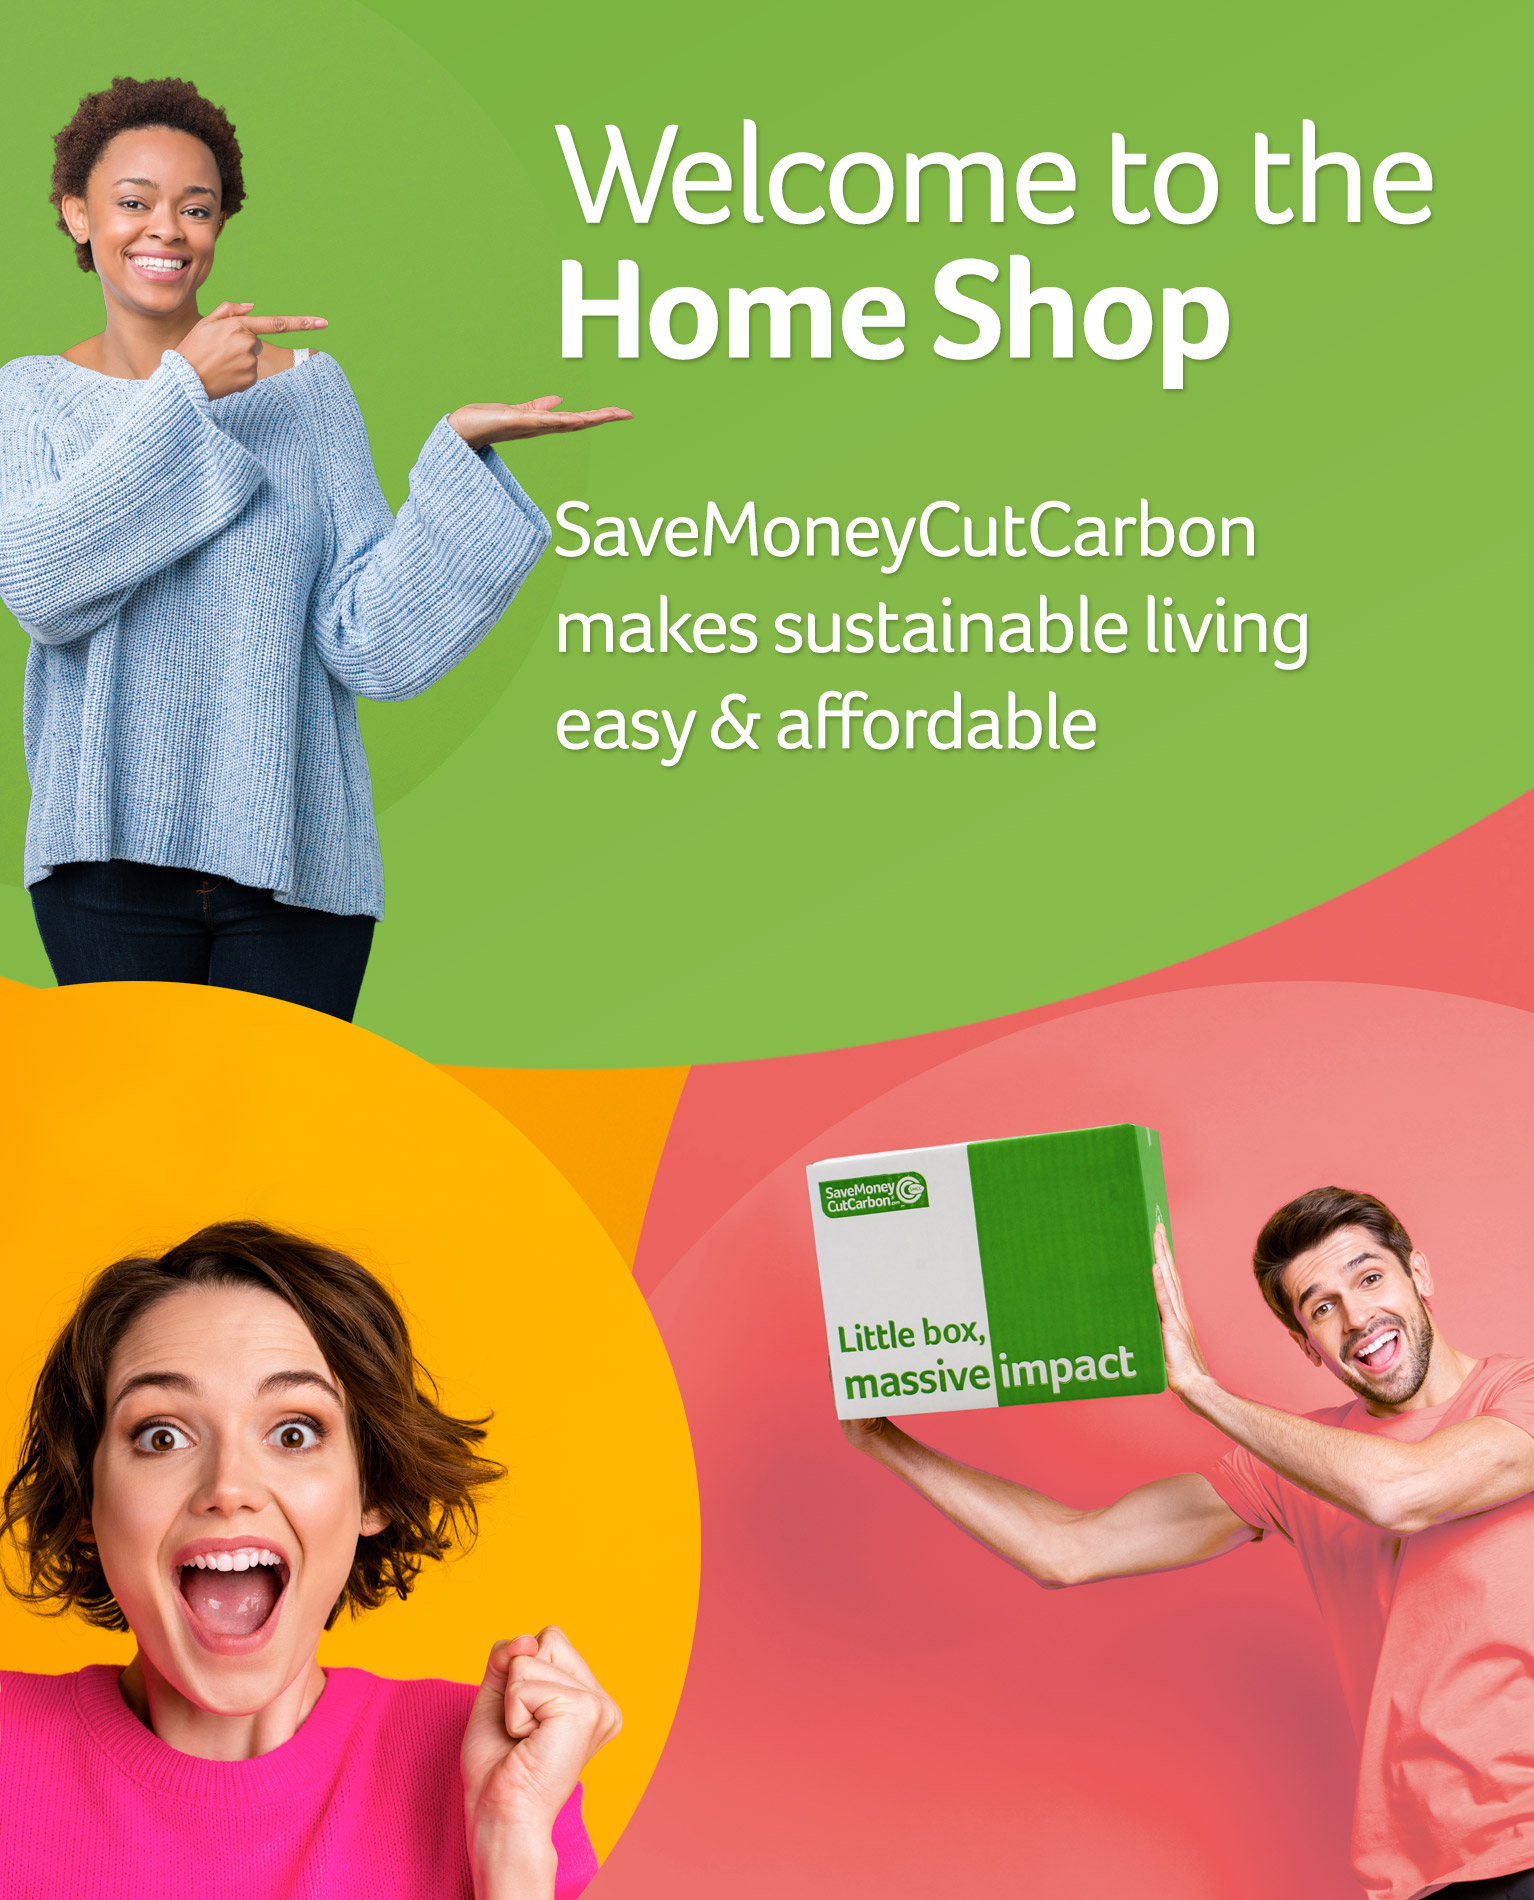 Welcome to the SaveMoneyCutcarbon Home Shop on mobile